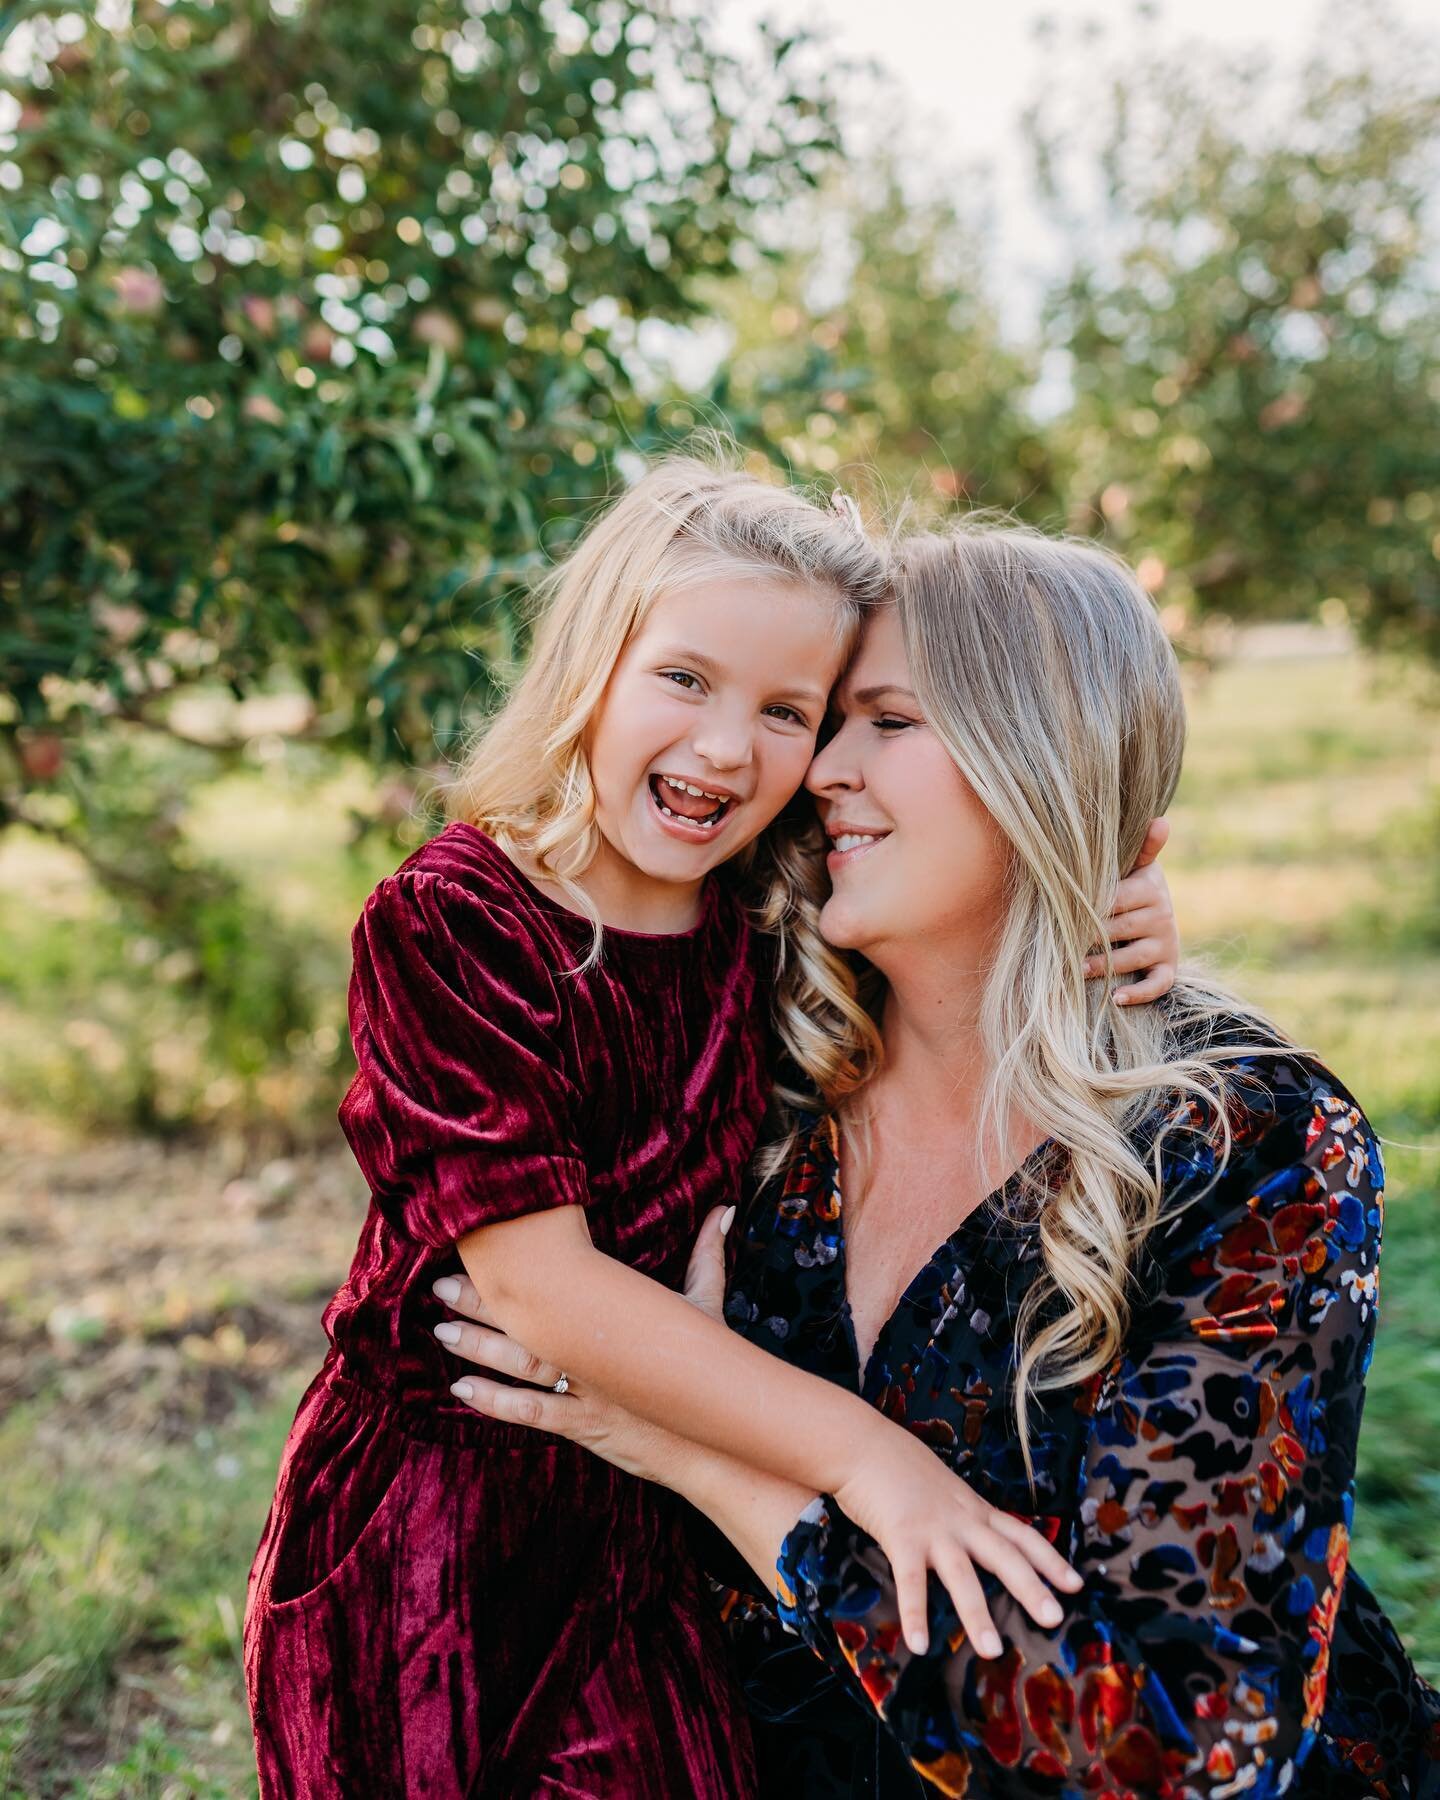 Great start to our apple orchard mini sessions tonight.

I am such a sucker for a good Mom and daughter shot. Especially when they&rsquo;re rocking velvet. 😍